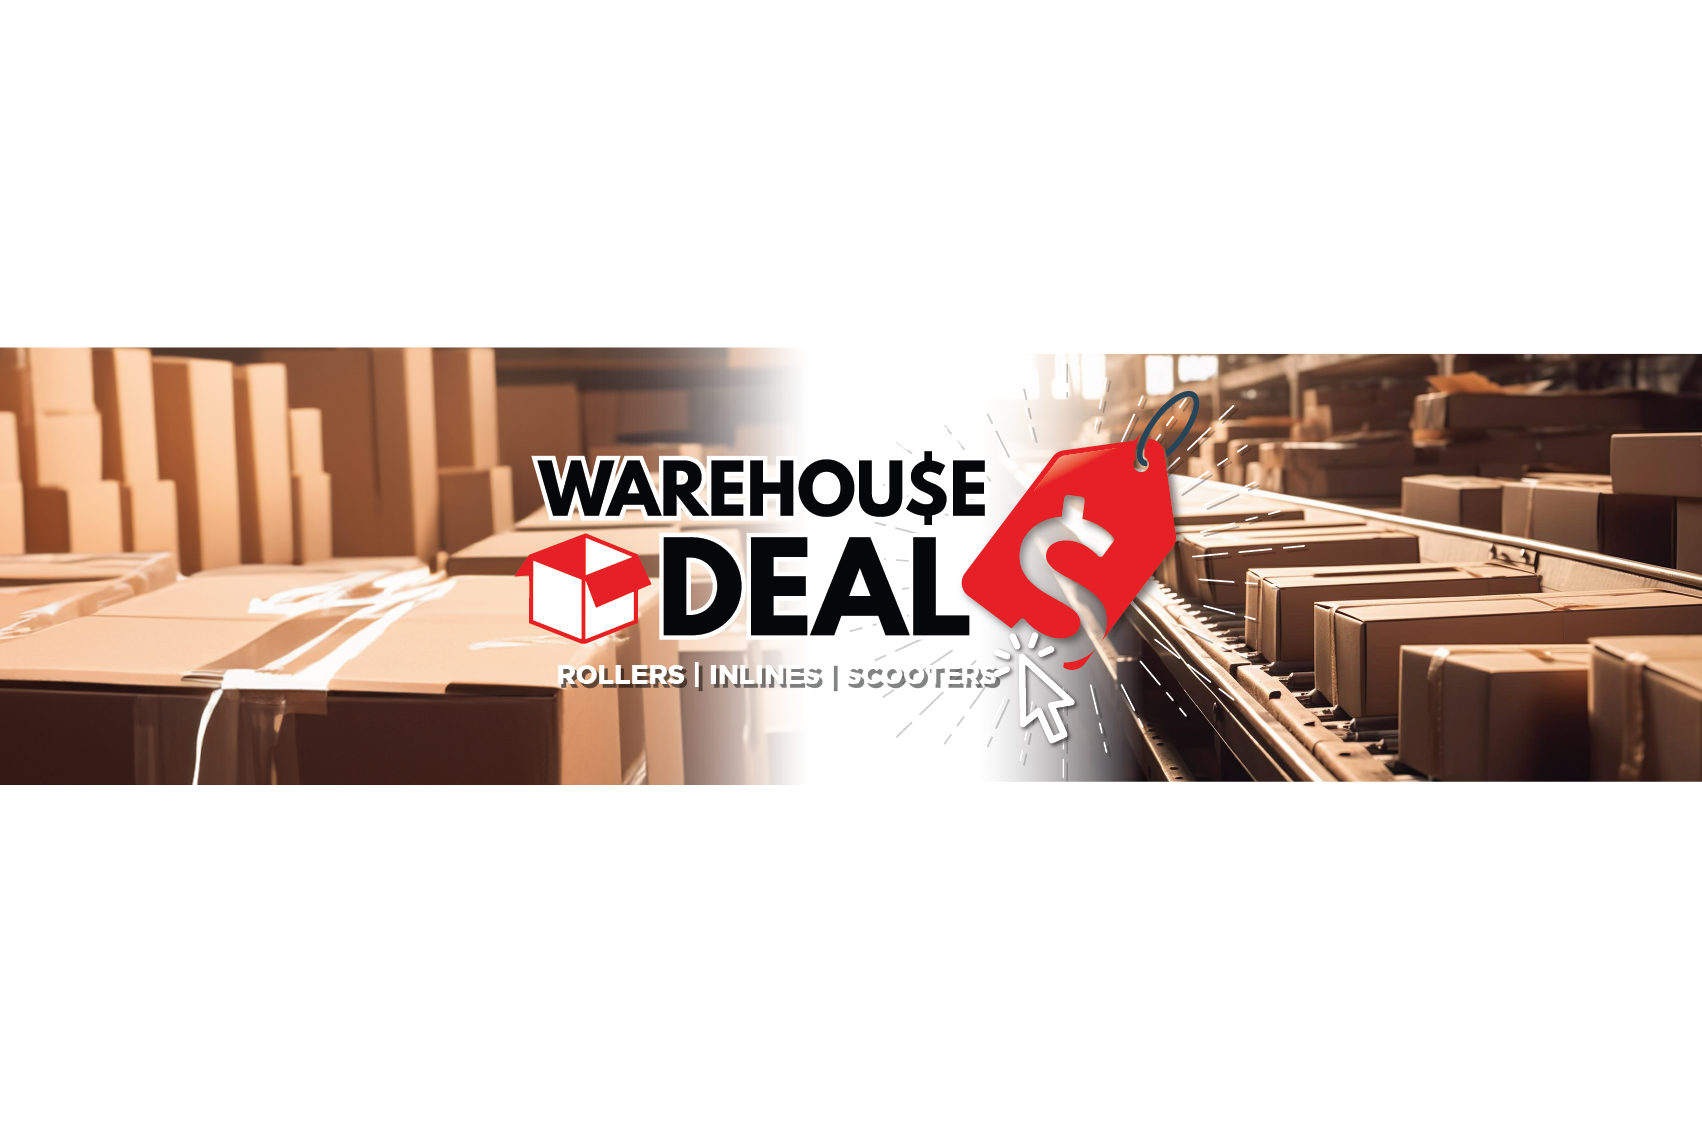 What Are  Warehouse Deals?